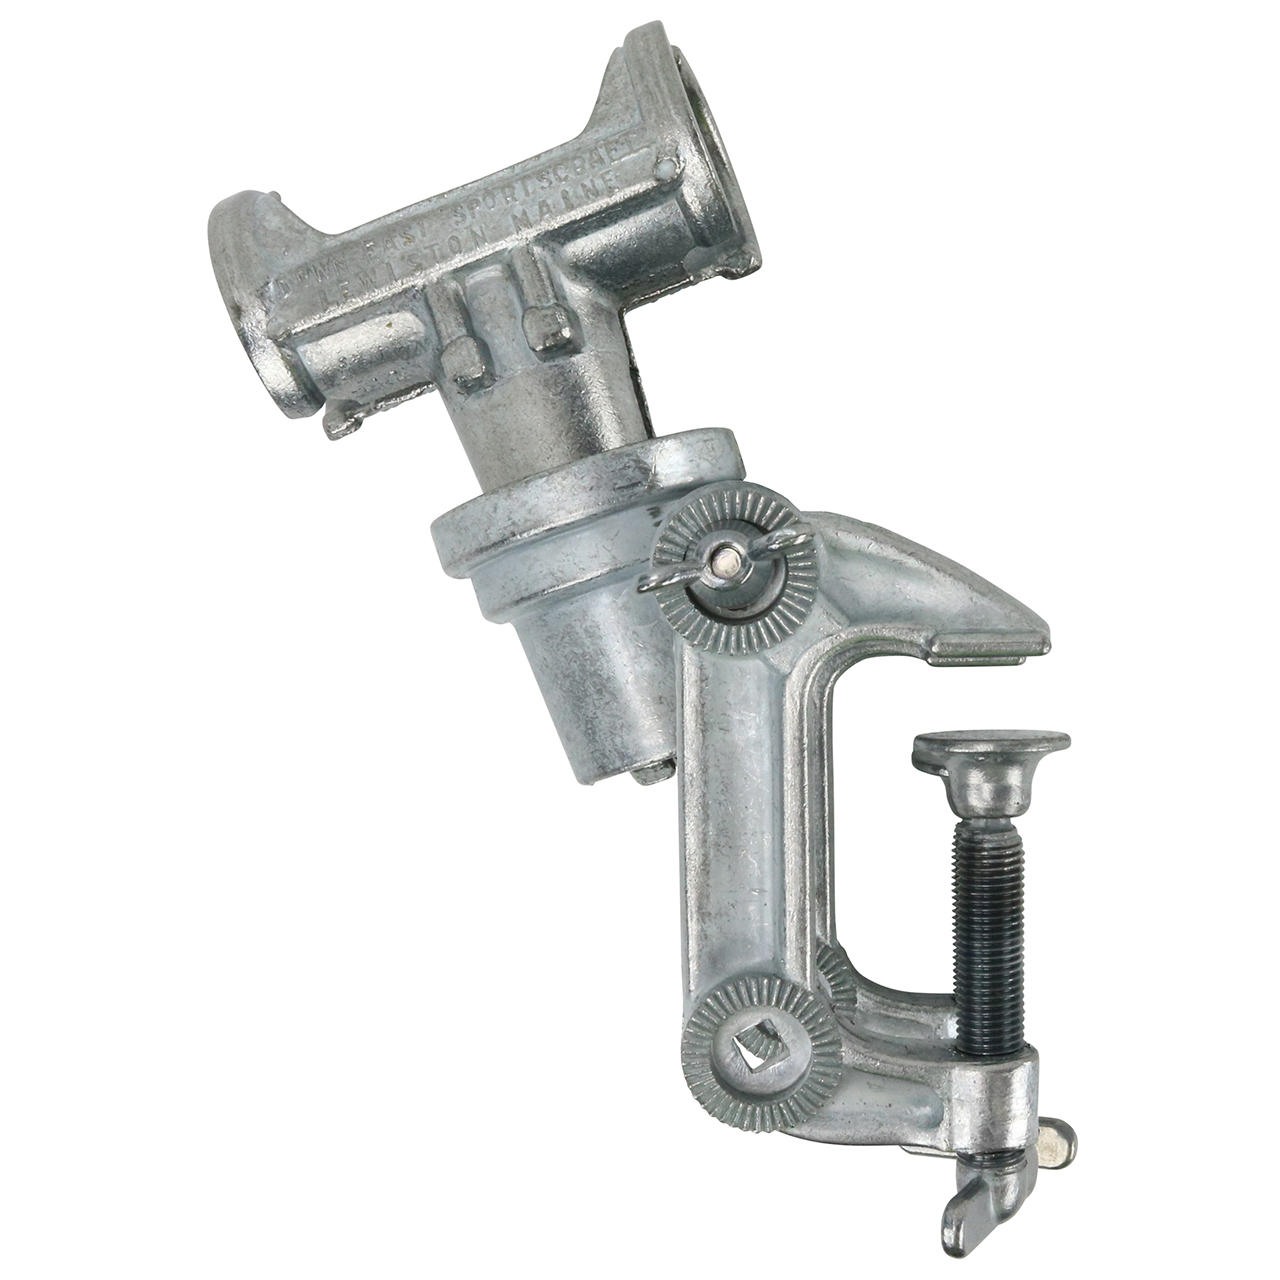 TITE-LOK Rod Holder and Clamp Combo